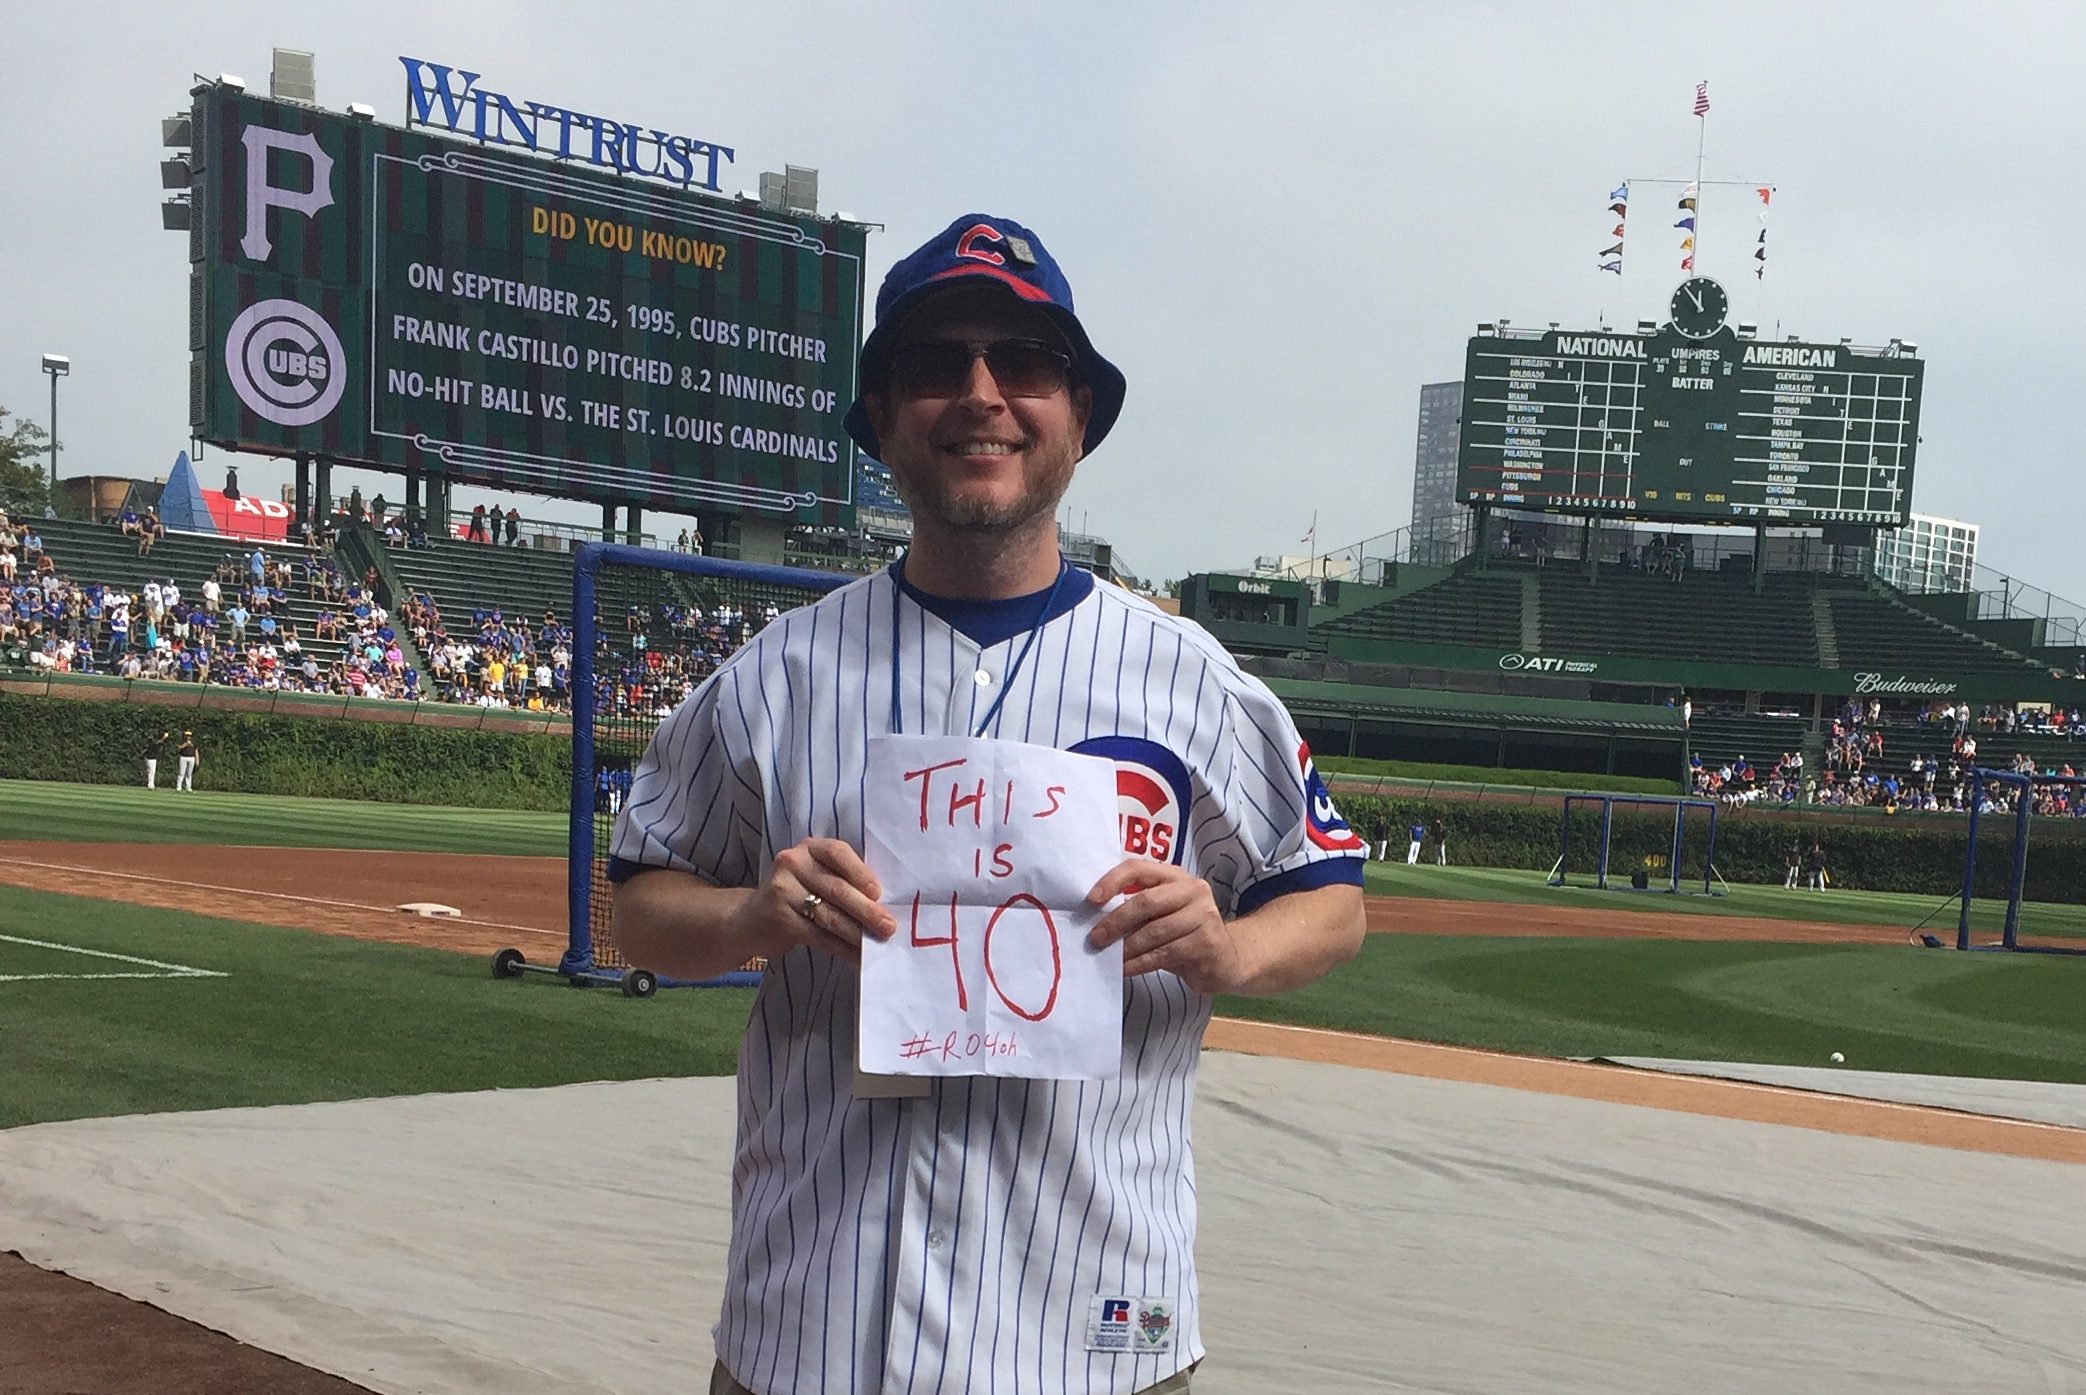 Rich O'Malley at Wrigley Field in Chicago. (Post Hill Press)